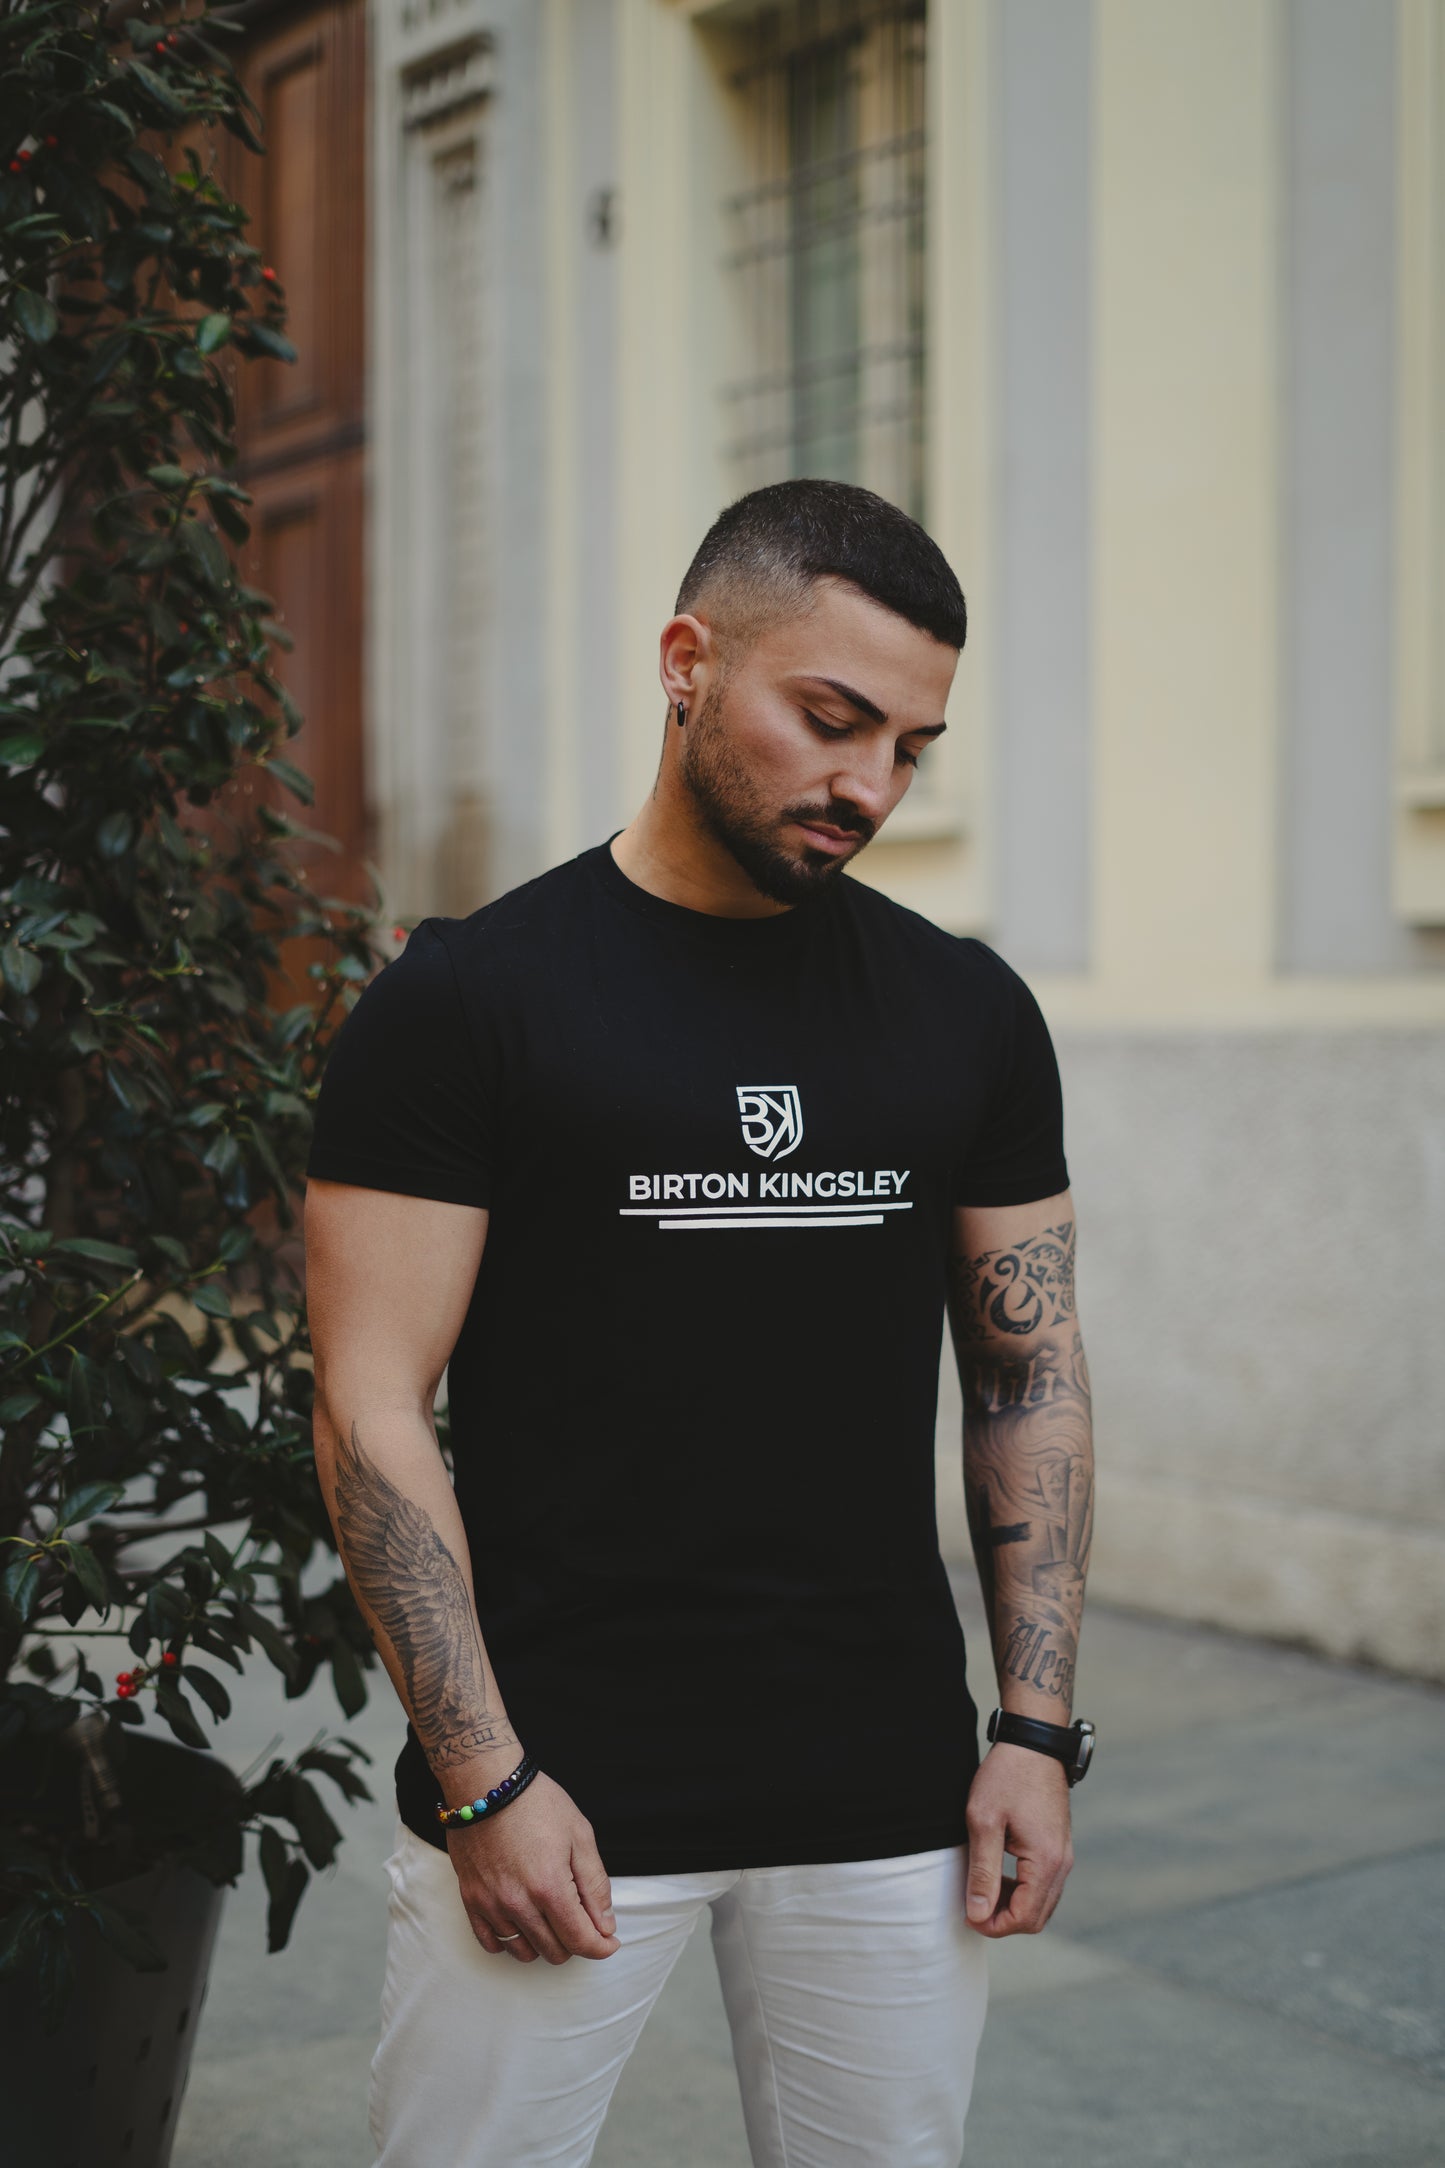 Exeter - Premium T-shirt made from 100% Supima cotton